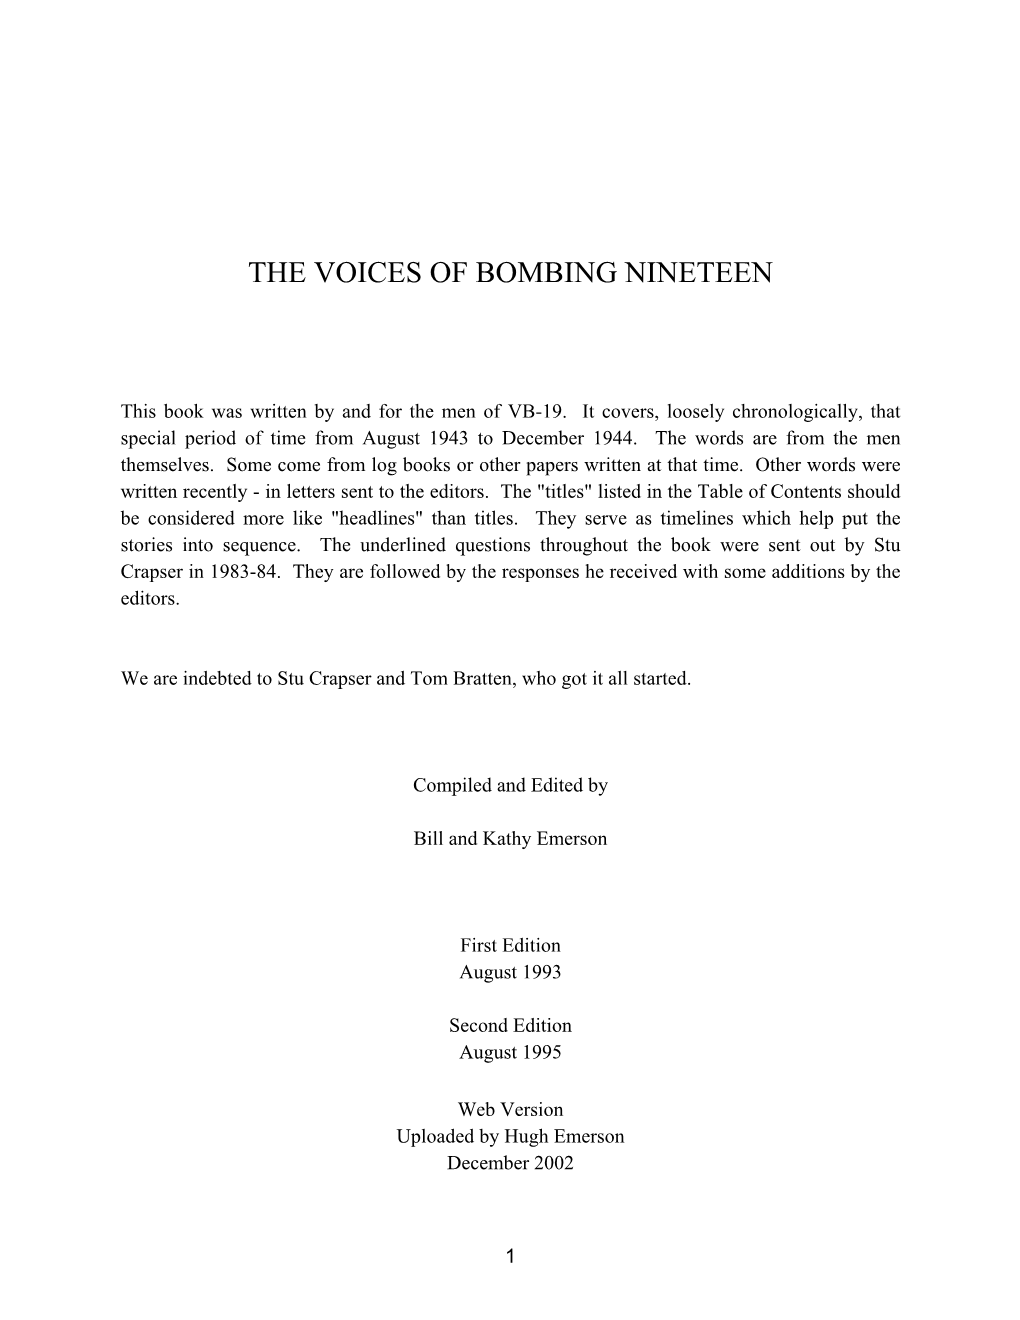 The Voices of Bombing Nineteen